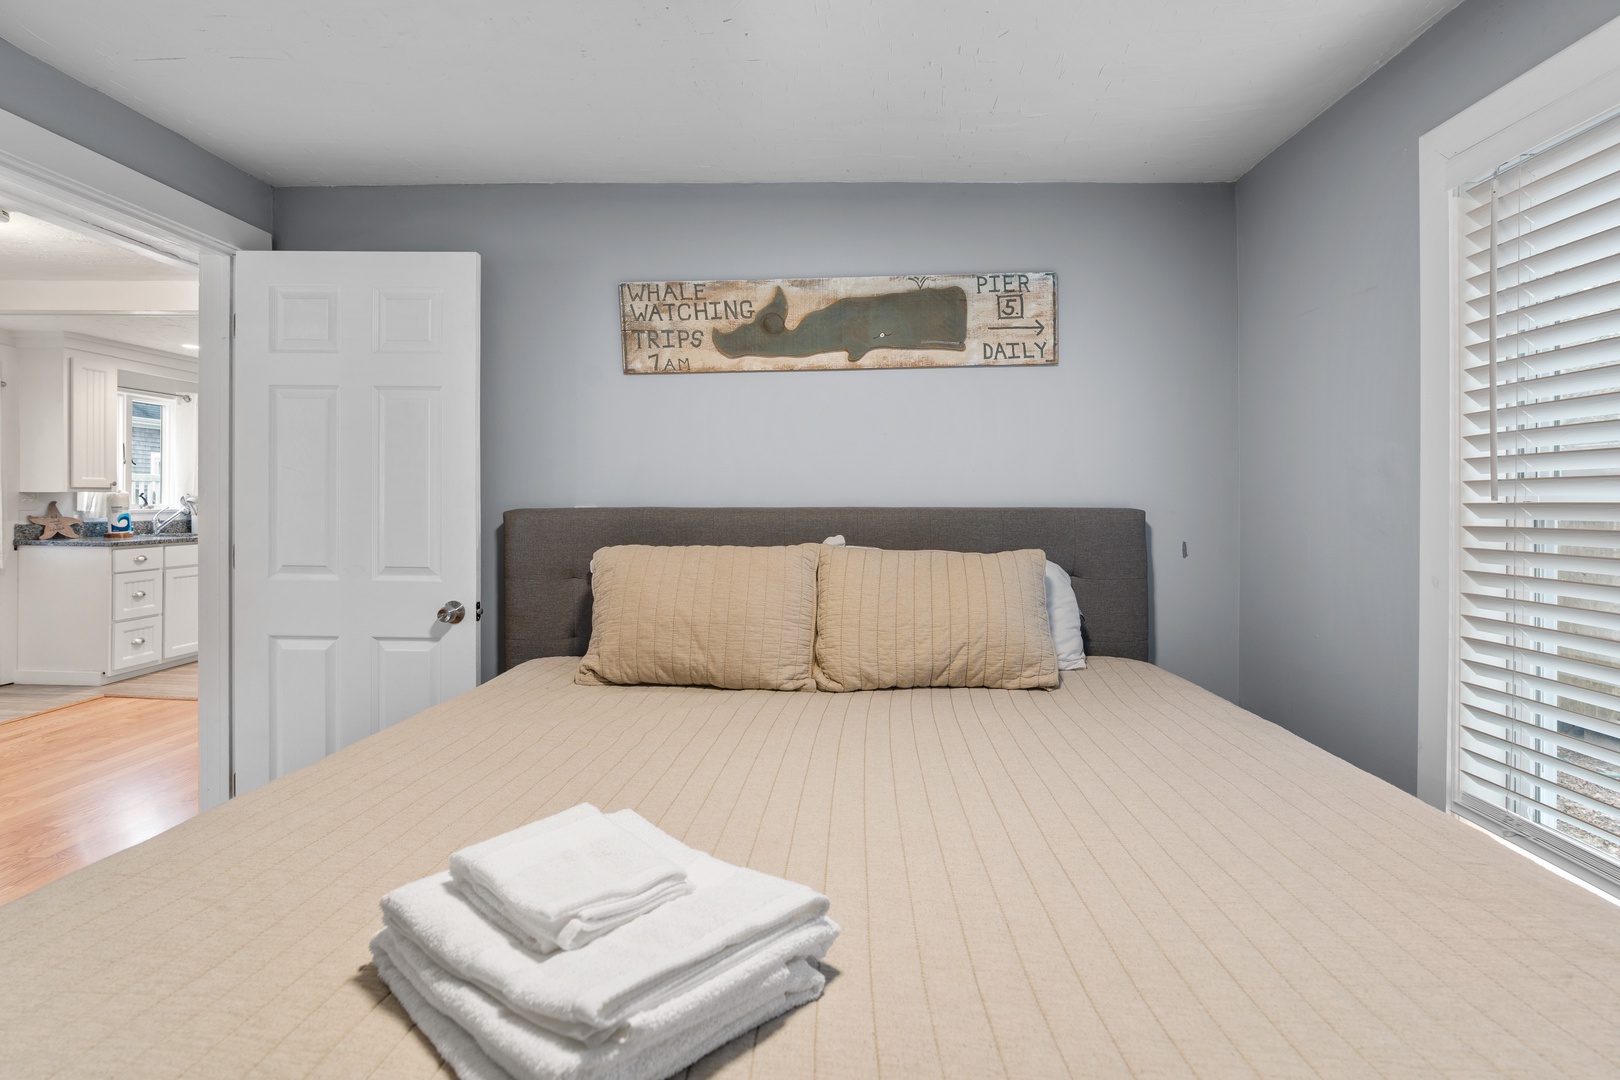 The first of two bedroom retreats features a plush king-sized bed & TV